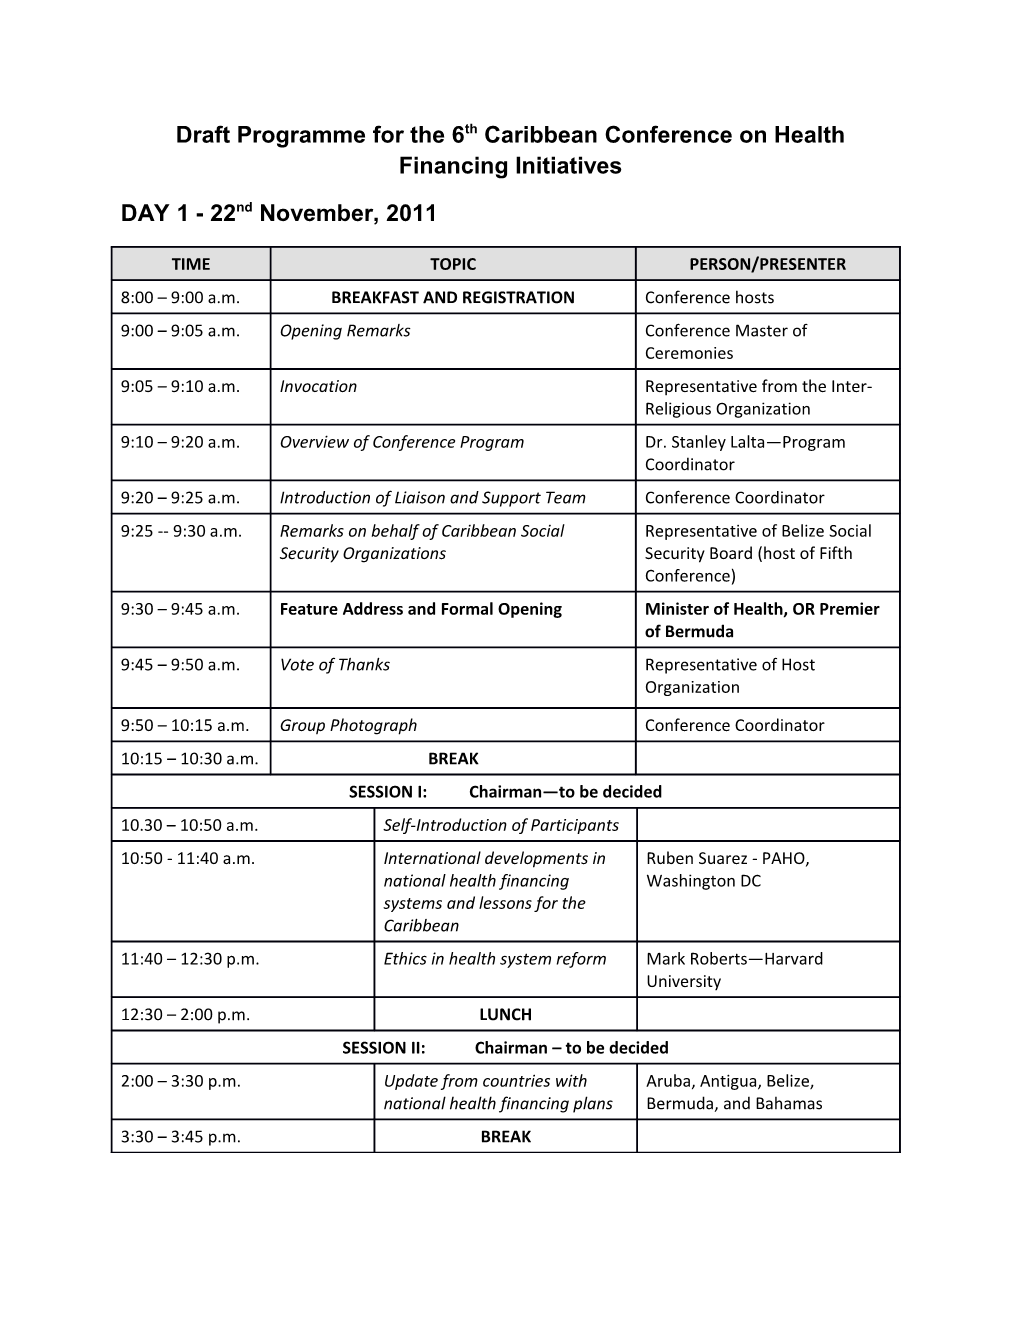 Draft Programme for the 6Th Caribbean Conference on Health Financing Initiatives